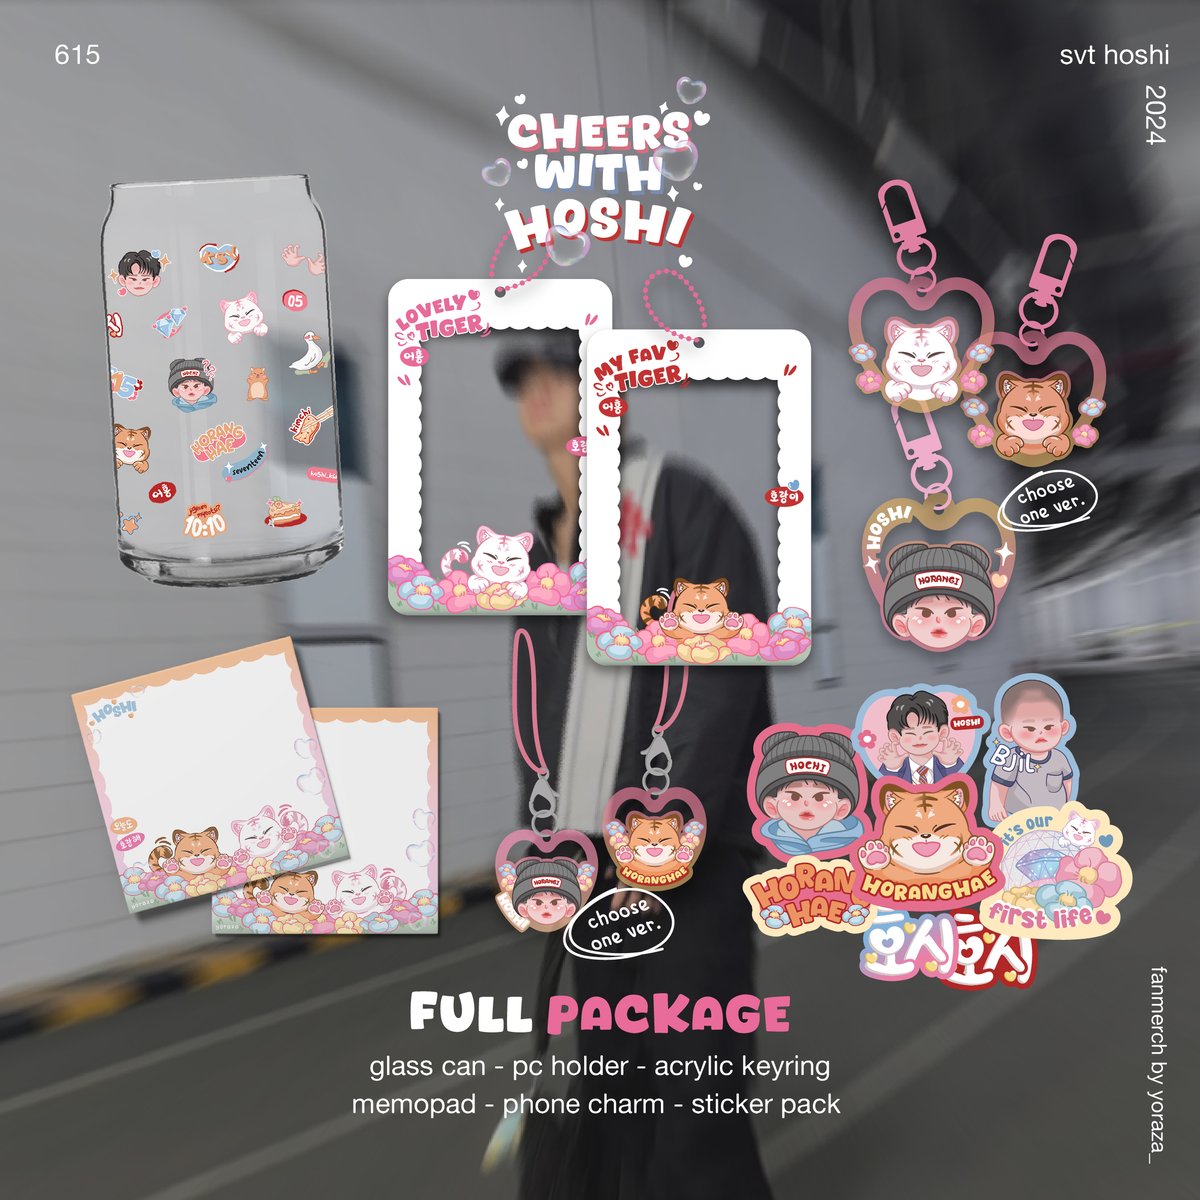 [MY GO 🇲🇾] Cheers with hoshi by @yoraza_ 🇮🇩

💰RM7-RM23 (depo RM4 - RM14)

🌟 Glass can, pc holder, keychain, phone charm, sticker pack, memopad 

DEADLINE : 30 MARCH, 3PM 

More details & order form : forms.gle/RPg4ze1kvaVJ24… 

#pasarseventeen #pasarSVT